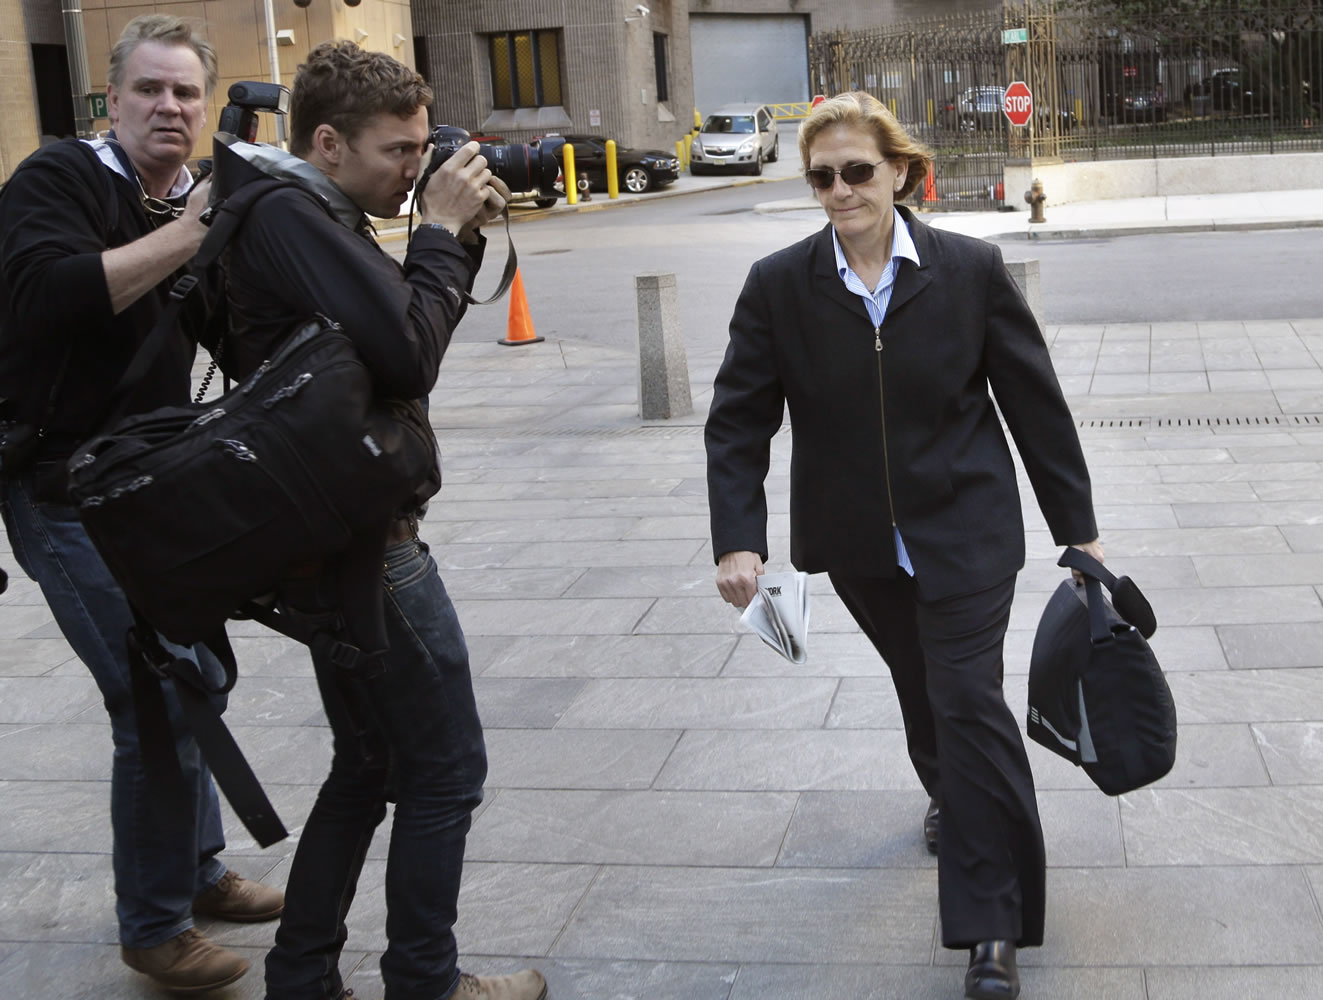 JoAnn Crupi, right, arrives at federal court in New York on Oct. 8.